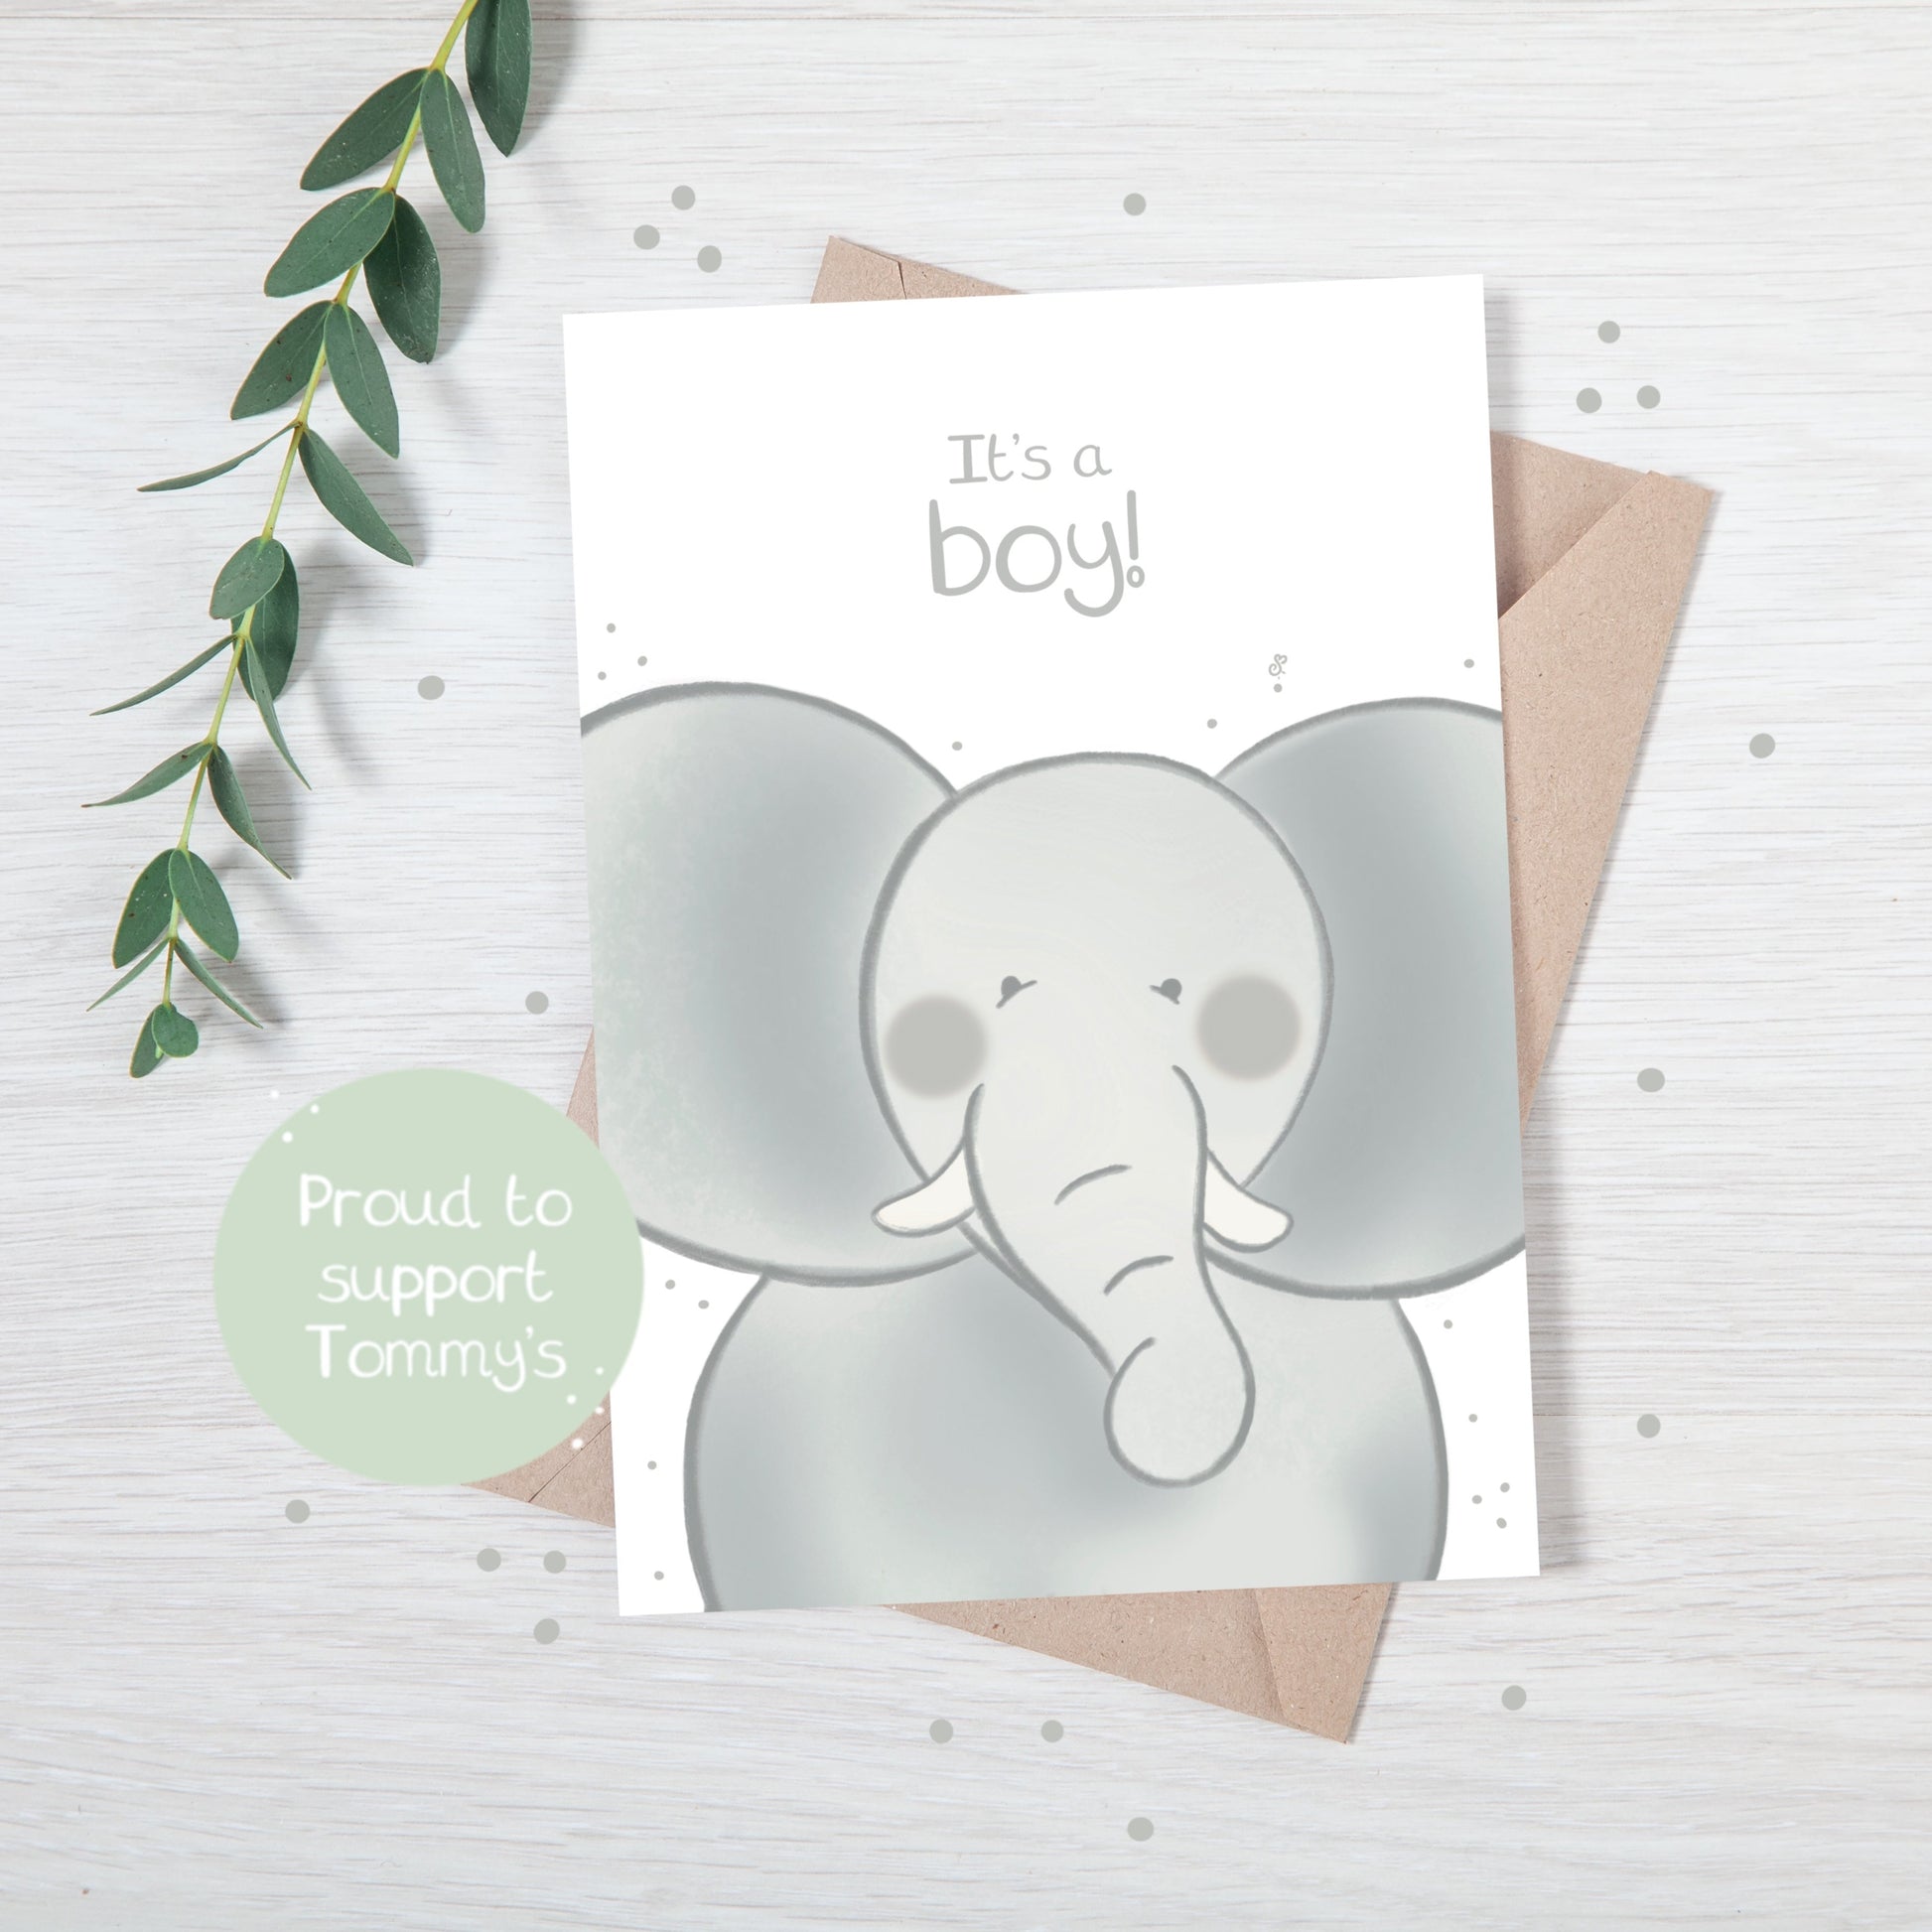 Handmade luxury new baby christening greetings card with a safari theme baby elephant popping up from the bottom with the title &quote "it's a boy" on a white background, with a kraft envelope